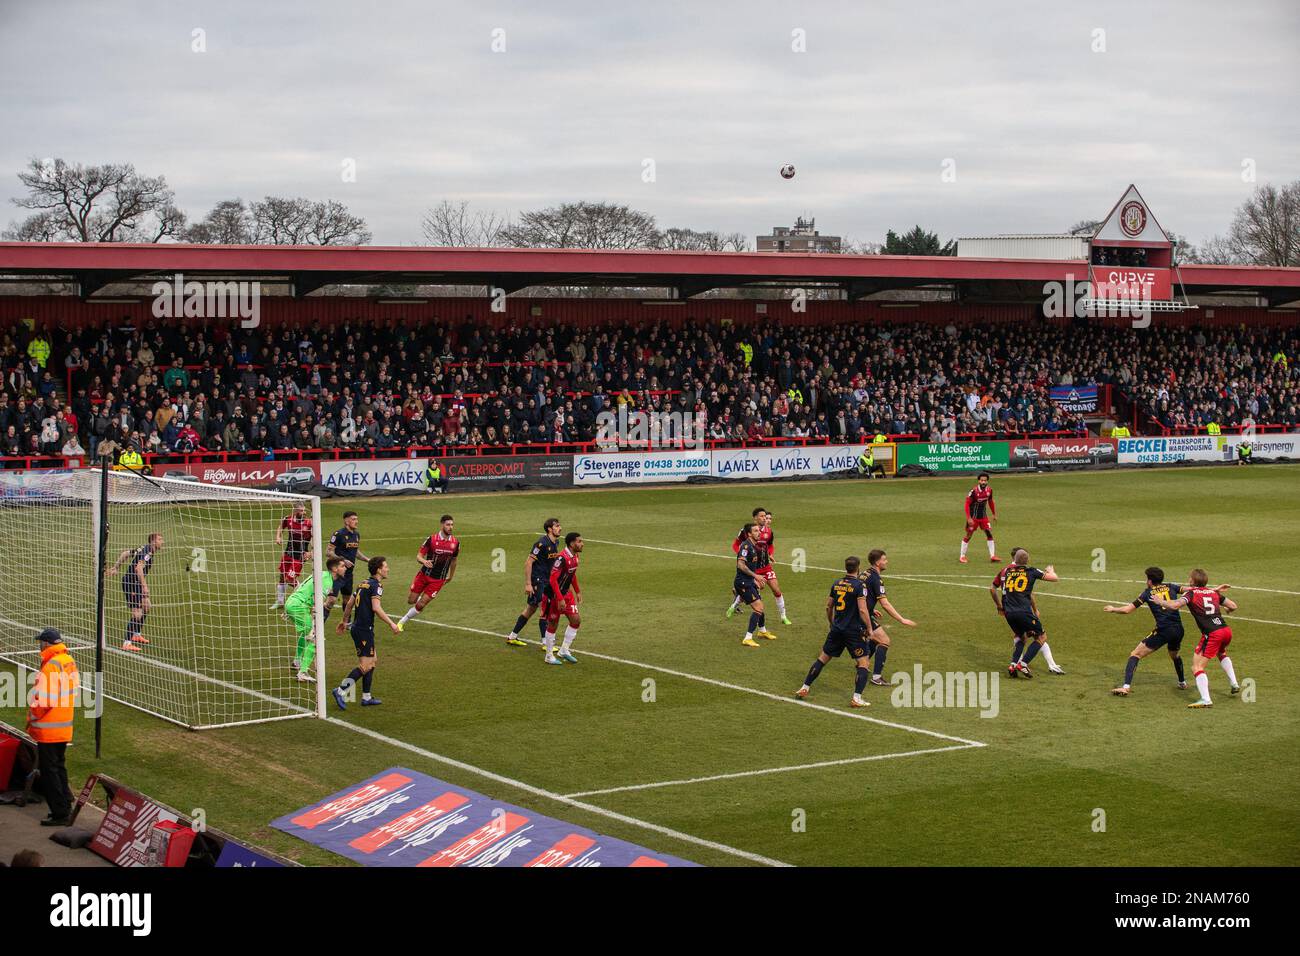 General view of Lamex Stadium, home of Stevenage Football Club during match. Stock Photo